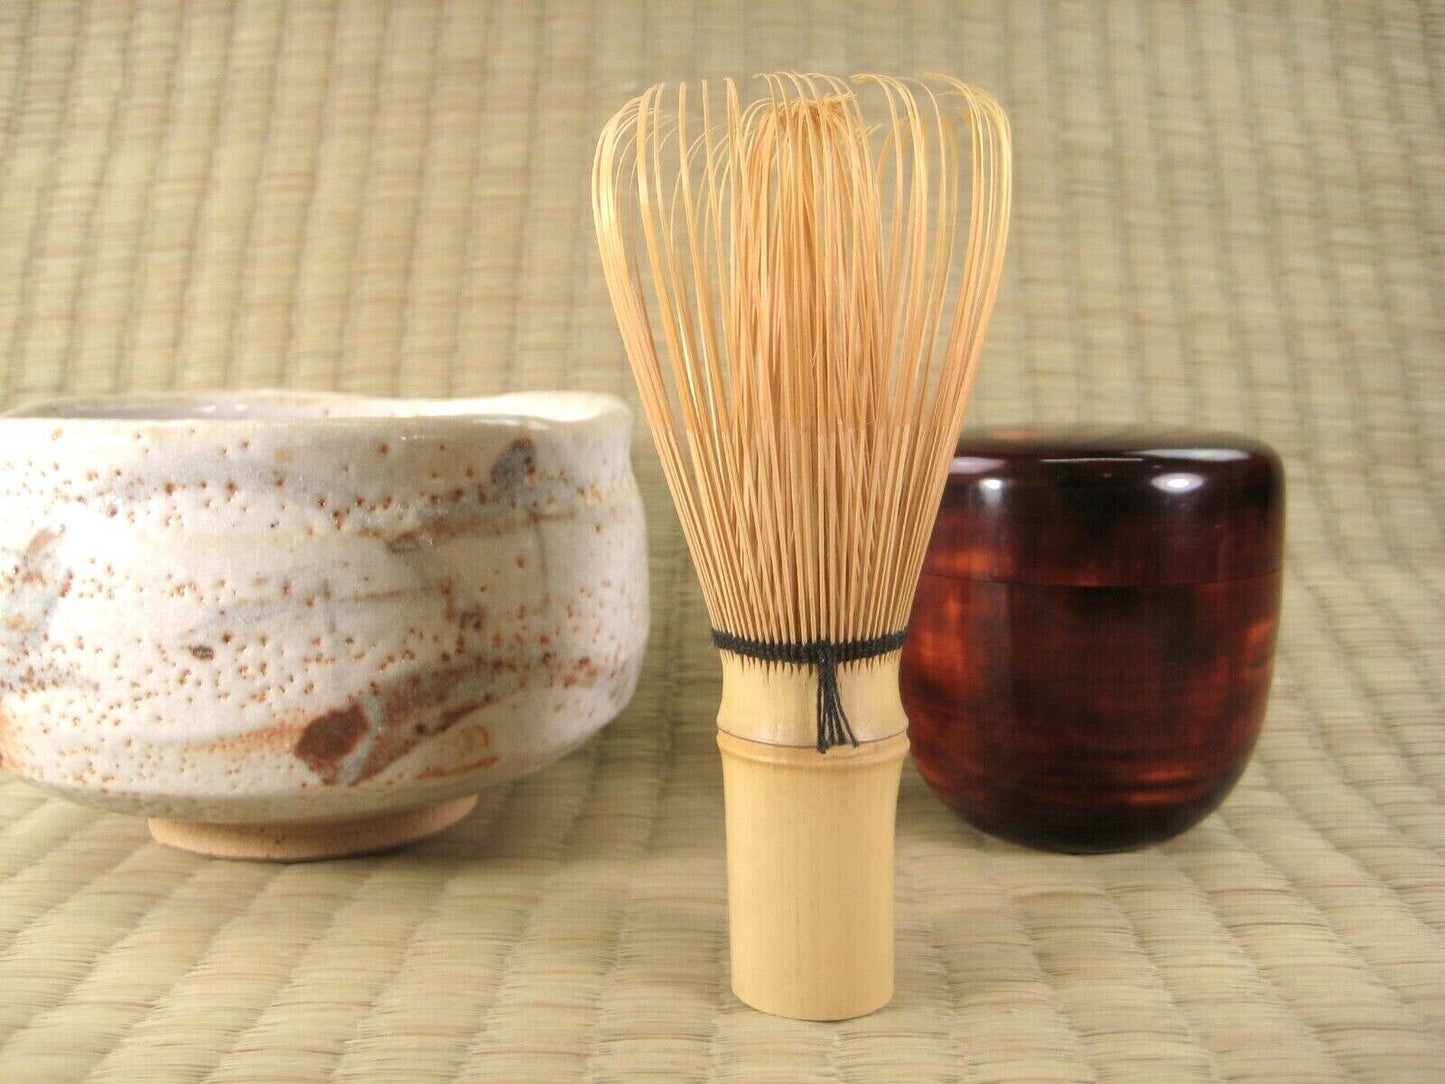 Vintage Japanese Chasen Tea Wisk For Frothing Matcha W/ Original Box